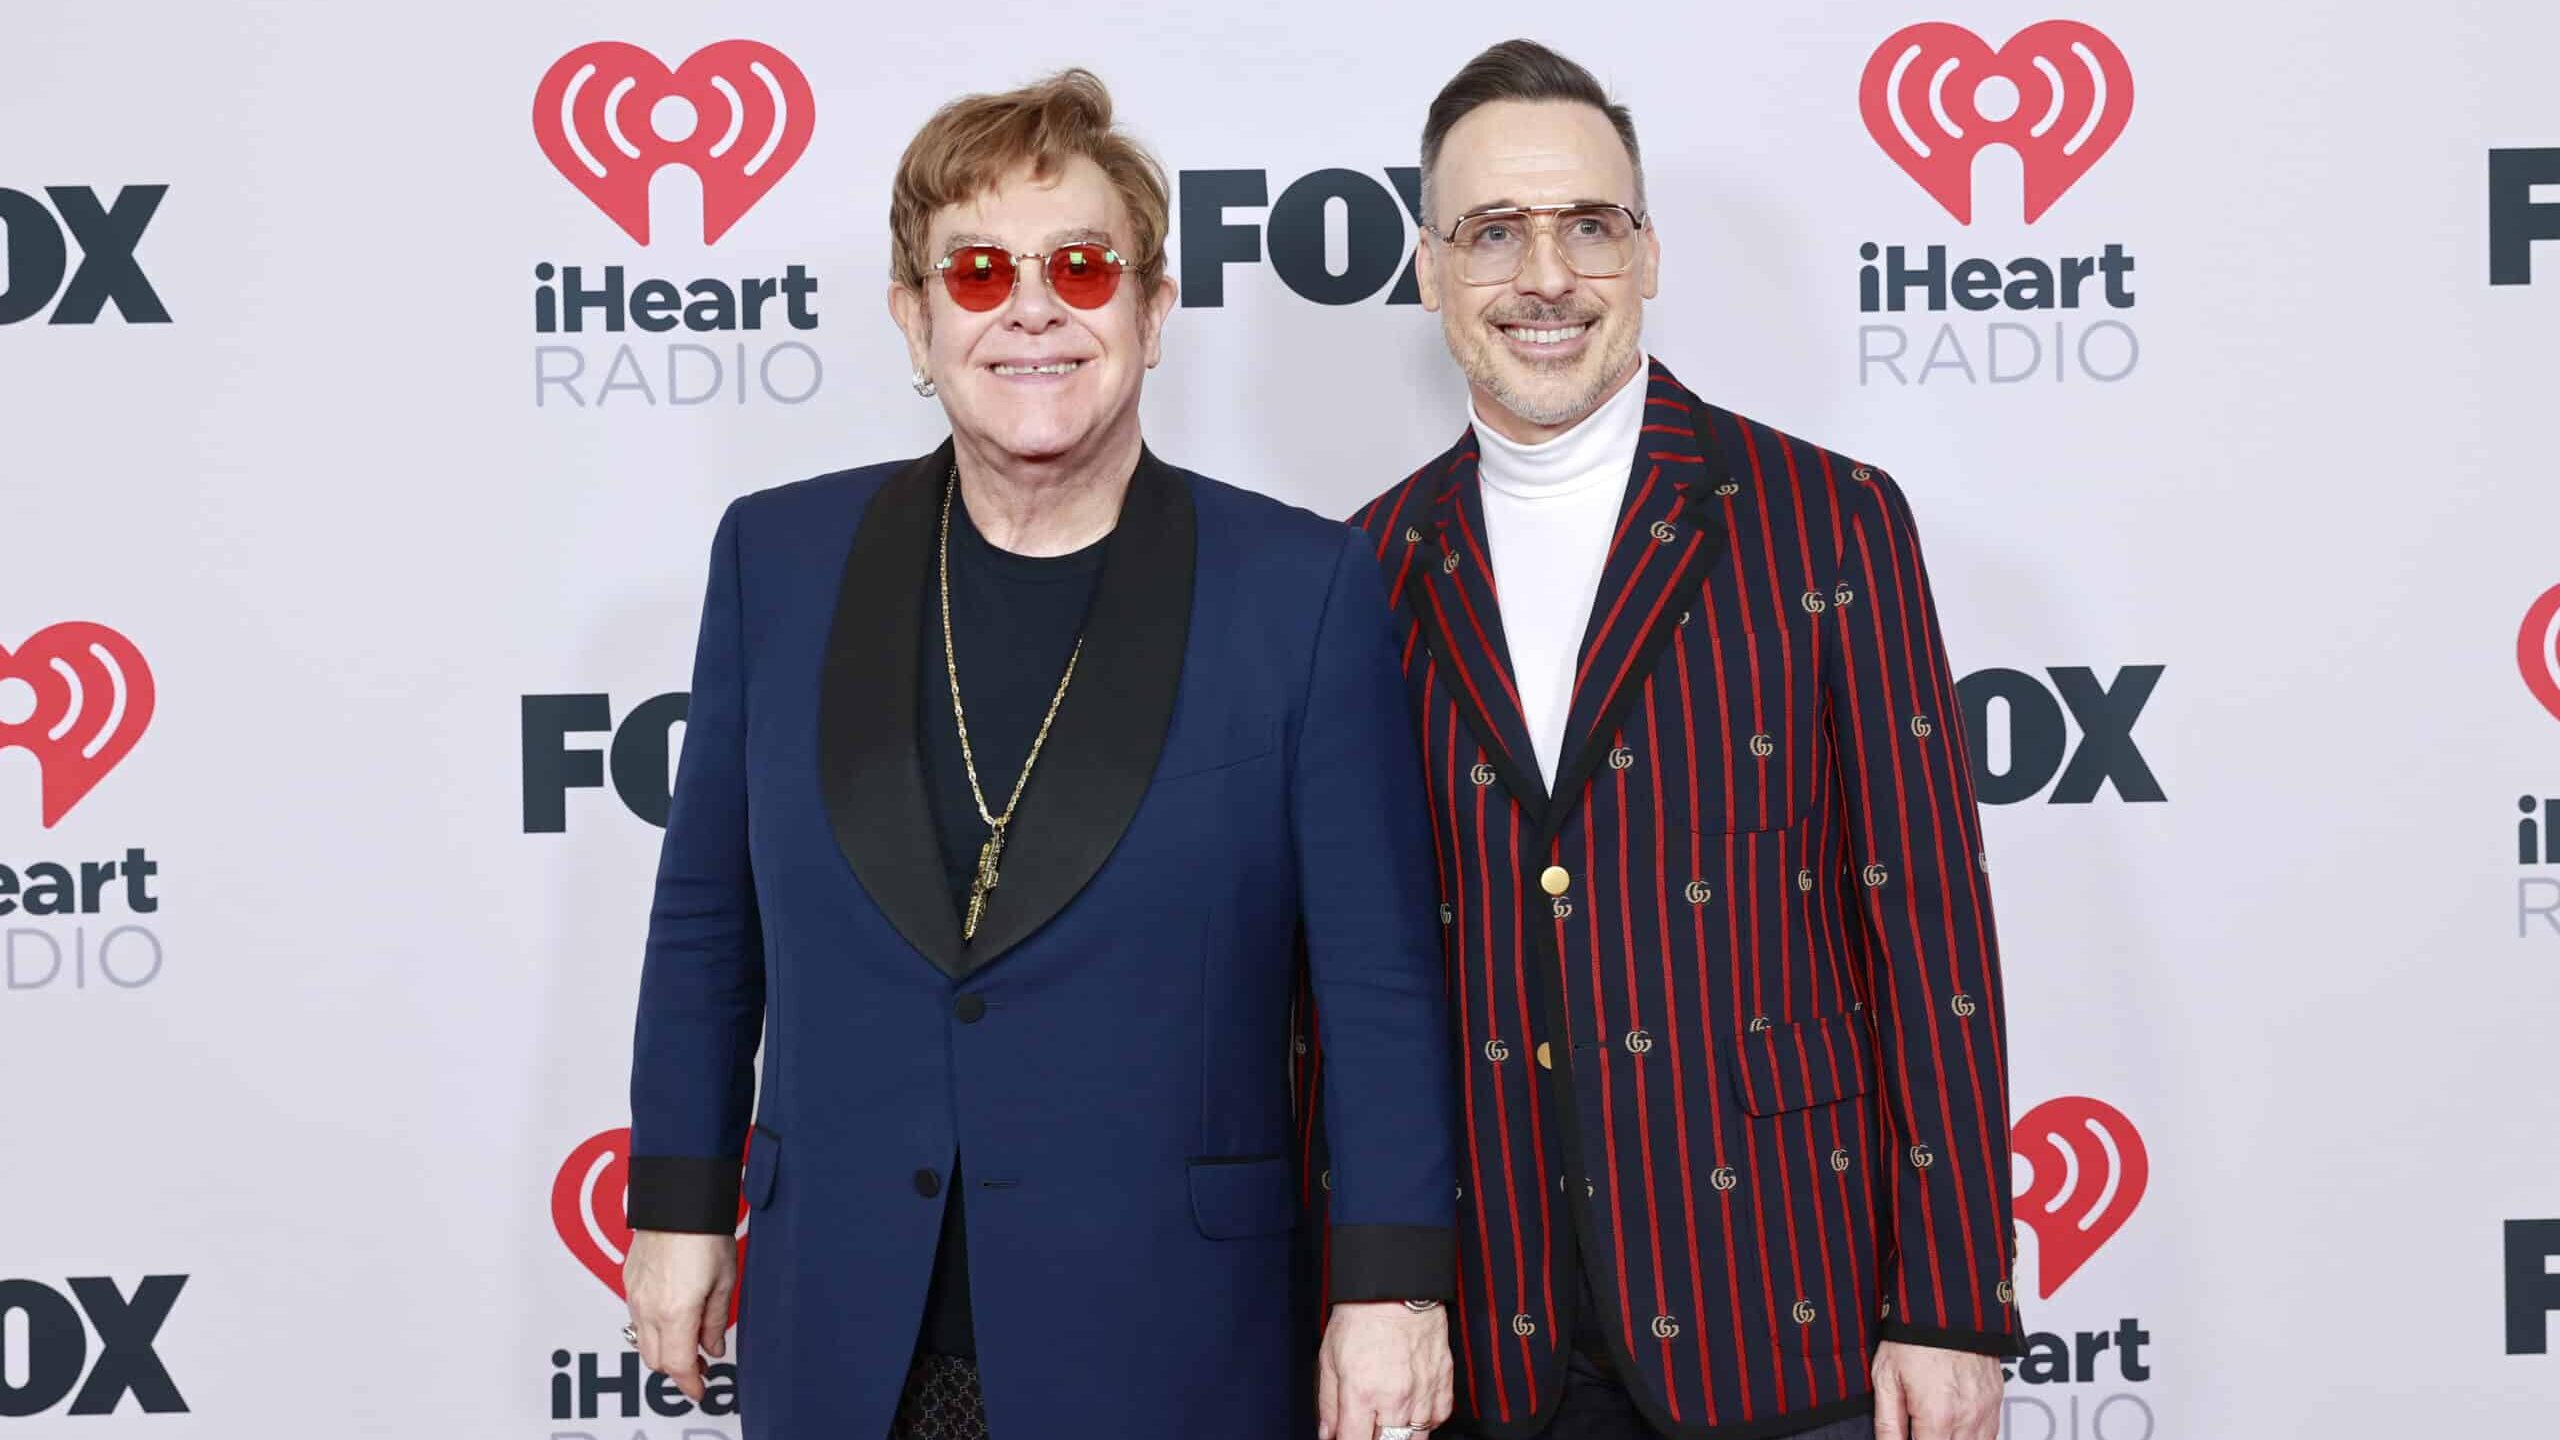 Honoree Elton John and David Furnish attend the 2021 iHeartRadio Music Awards at The Dolby Theatre in Los Angeles, California, which was broadcast live on FOX on May 27, 2021.